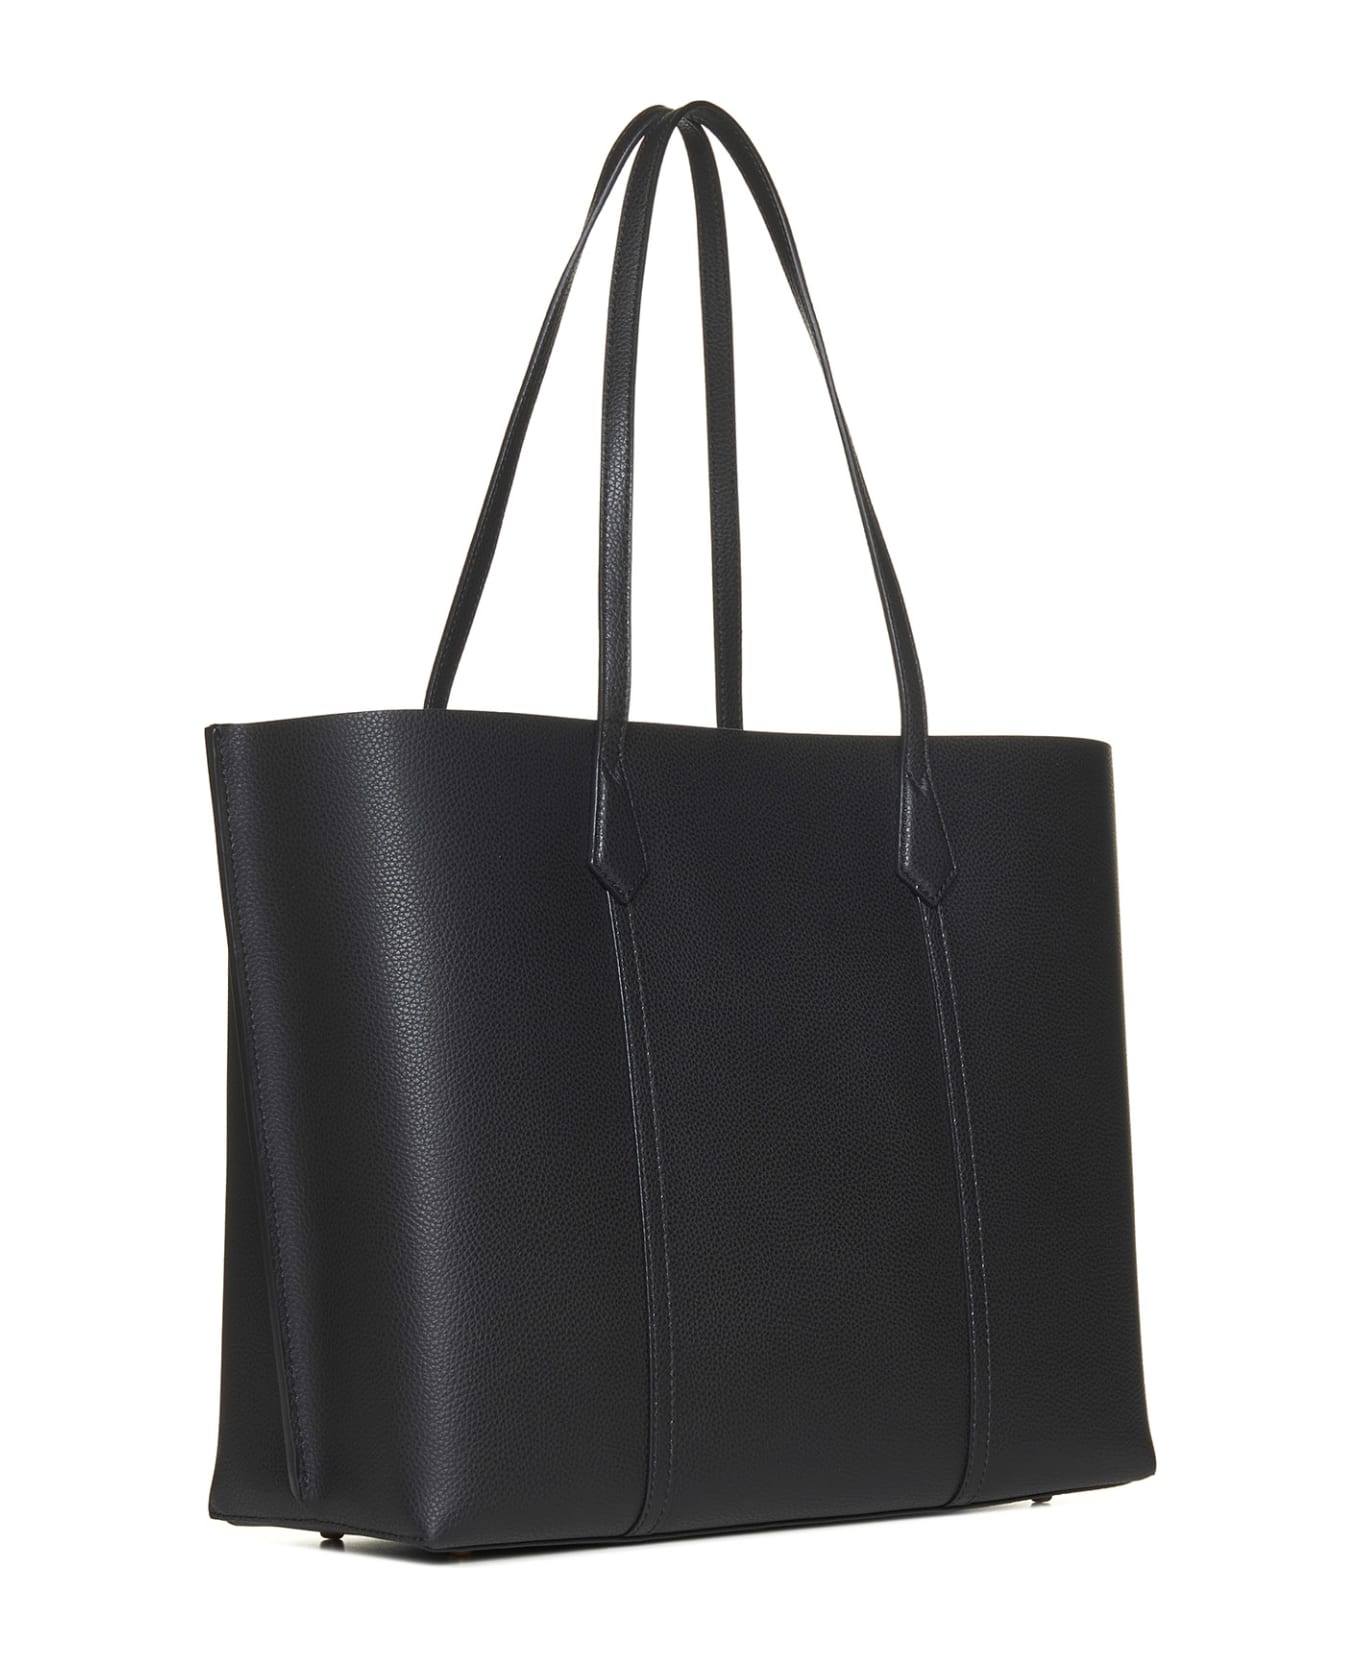 Tory Burch Perry Triple Compartment Tote Bag - black トートバッグ